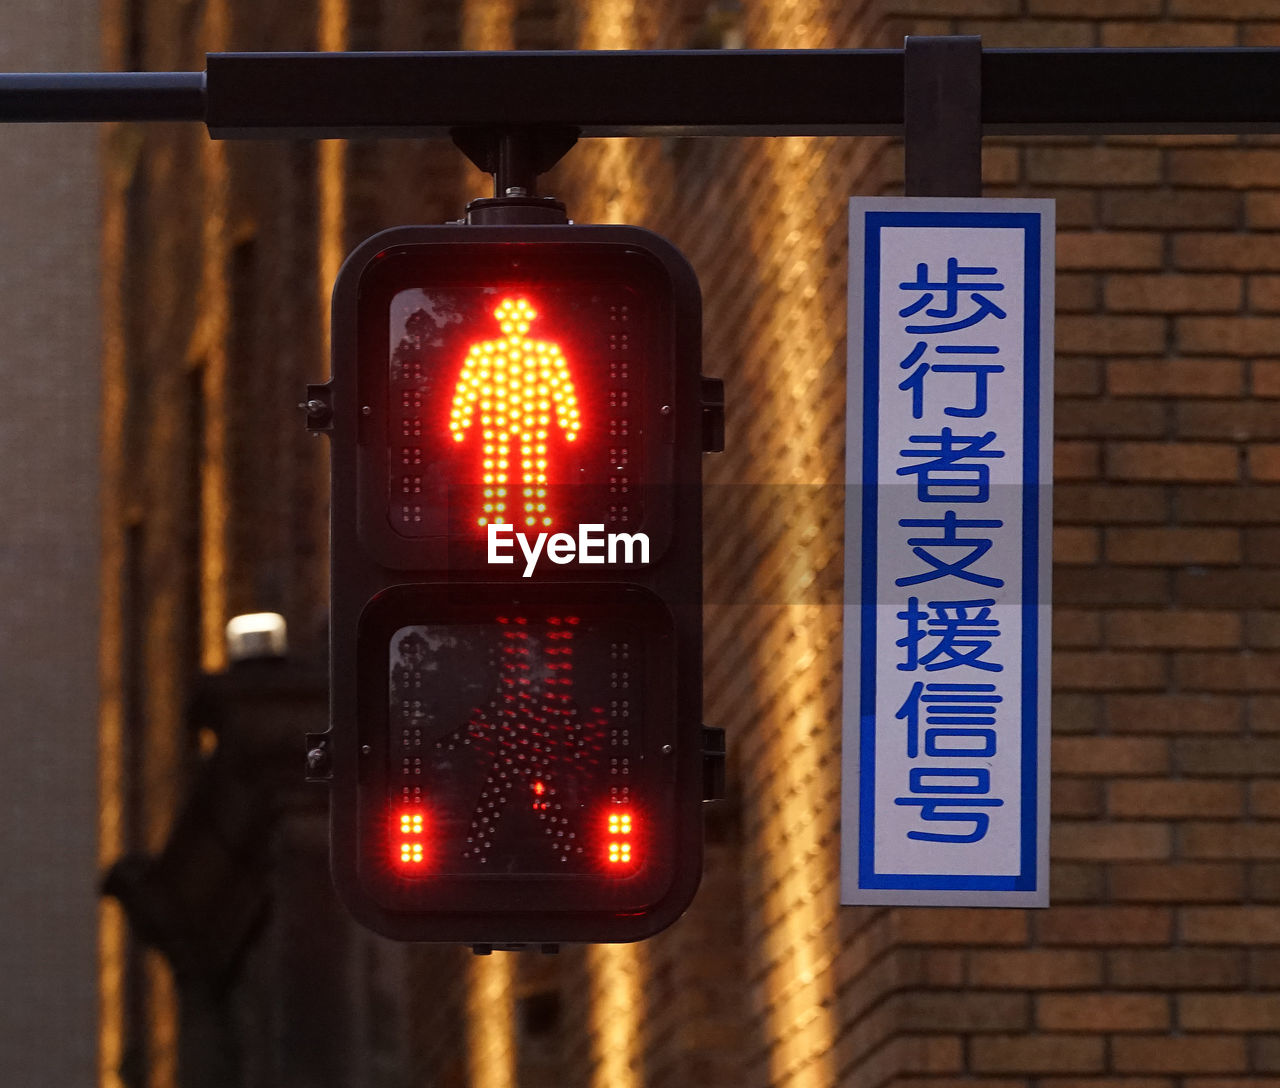 Red-lighted led pedestrian signals in japan
